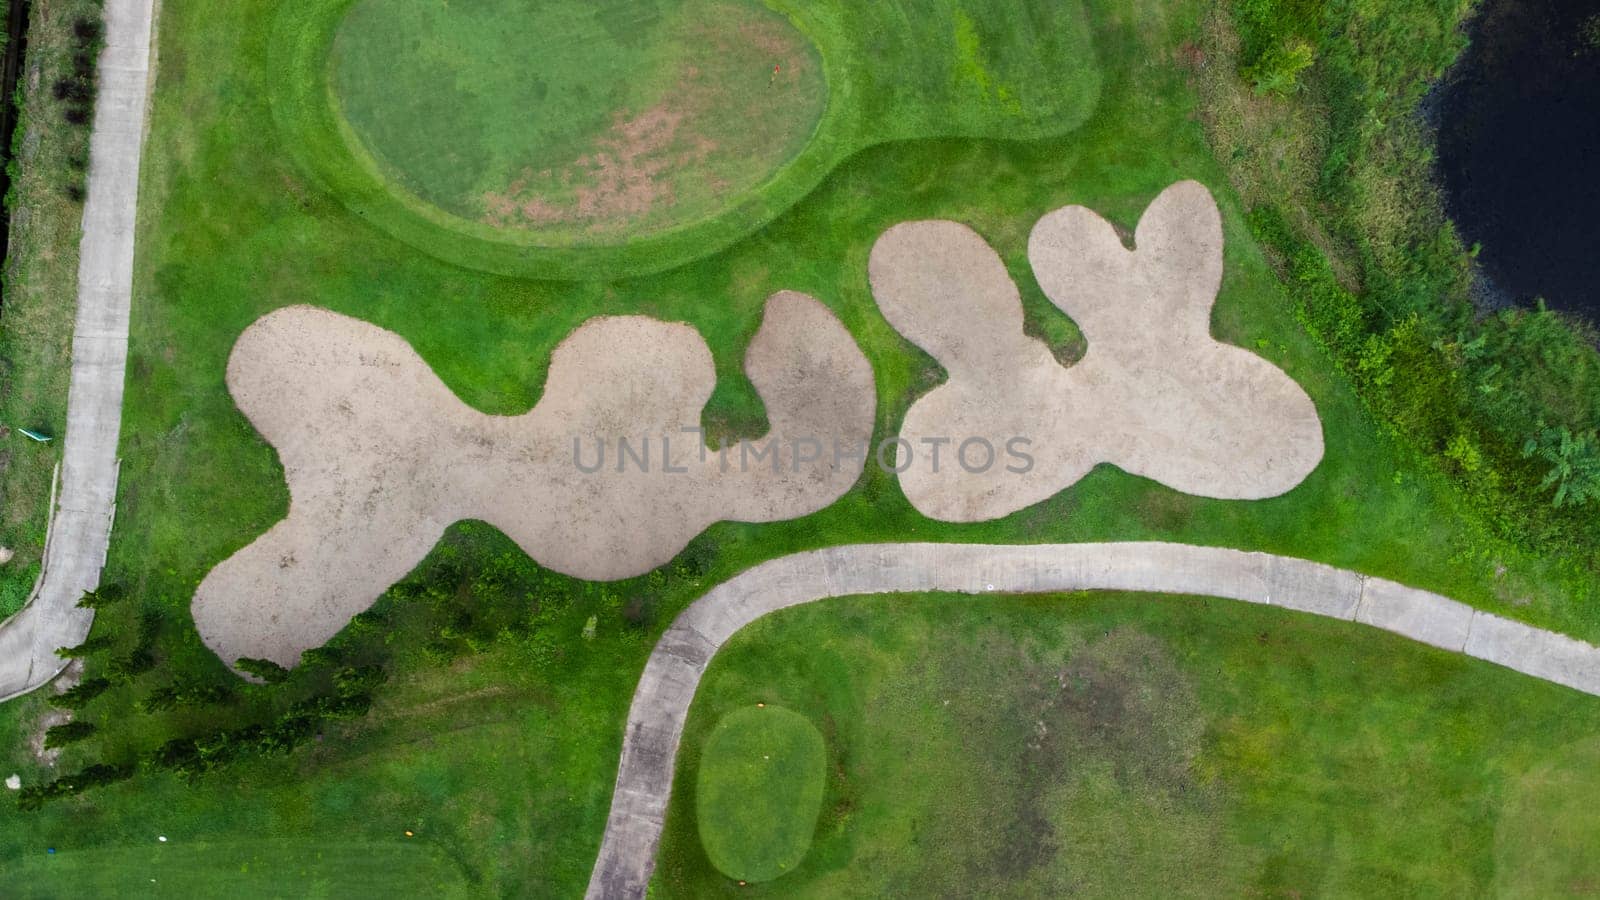 Aerial view of golf course with a rich green turf beautiful scenery. Sand bunkers at a beautiful golf course by the pond.